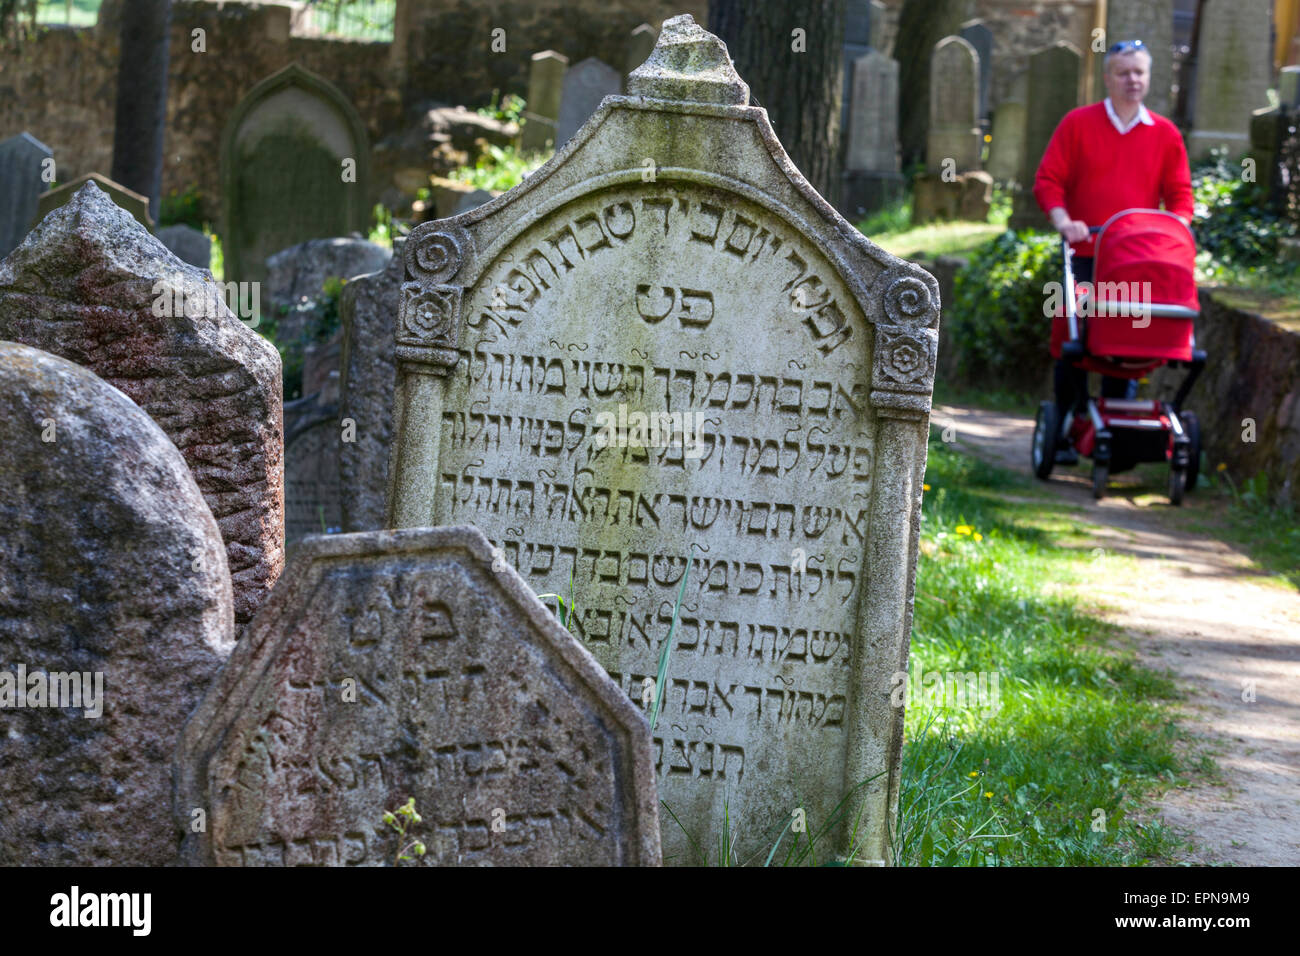 Trebic Czech Republic, Old Jewish cemetery, UNESCO World Heritage sites. A man walking with a baby stroller., Man pushing pram Stock Photo